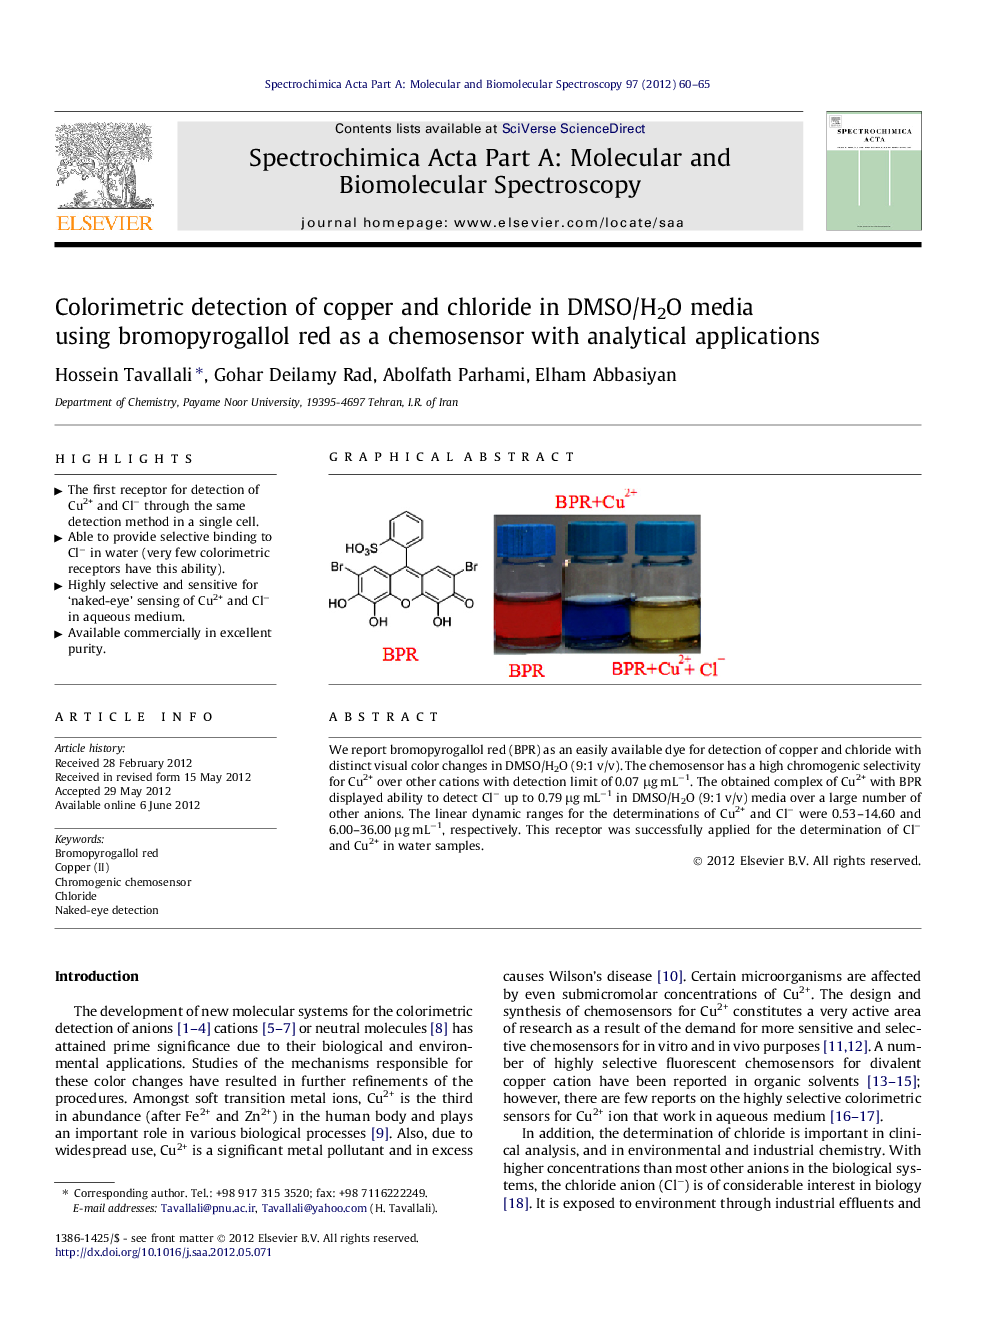 Colorimetric detection of copper and chloride in DMSO/H2O media using bromopyrogallol red as a chemosensor with analytical applications